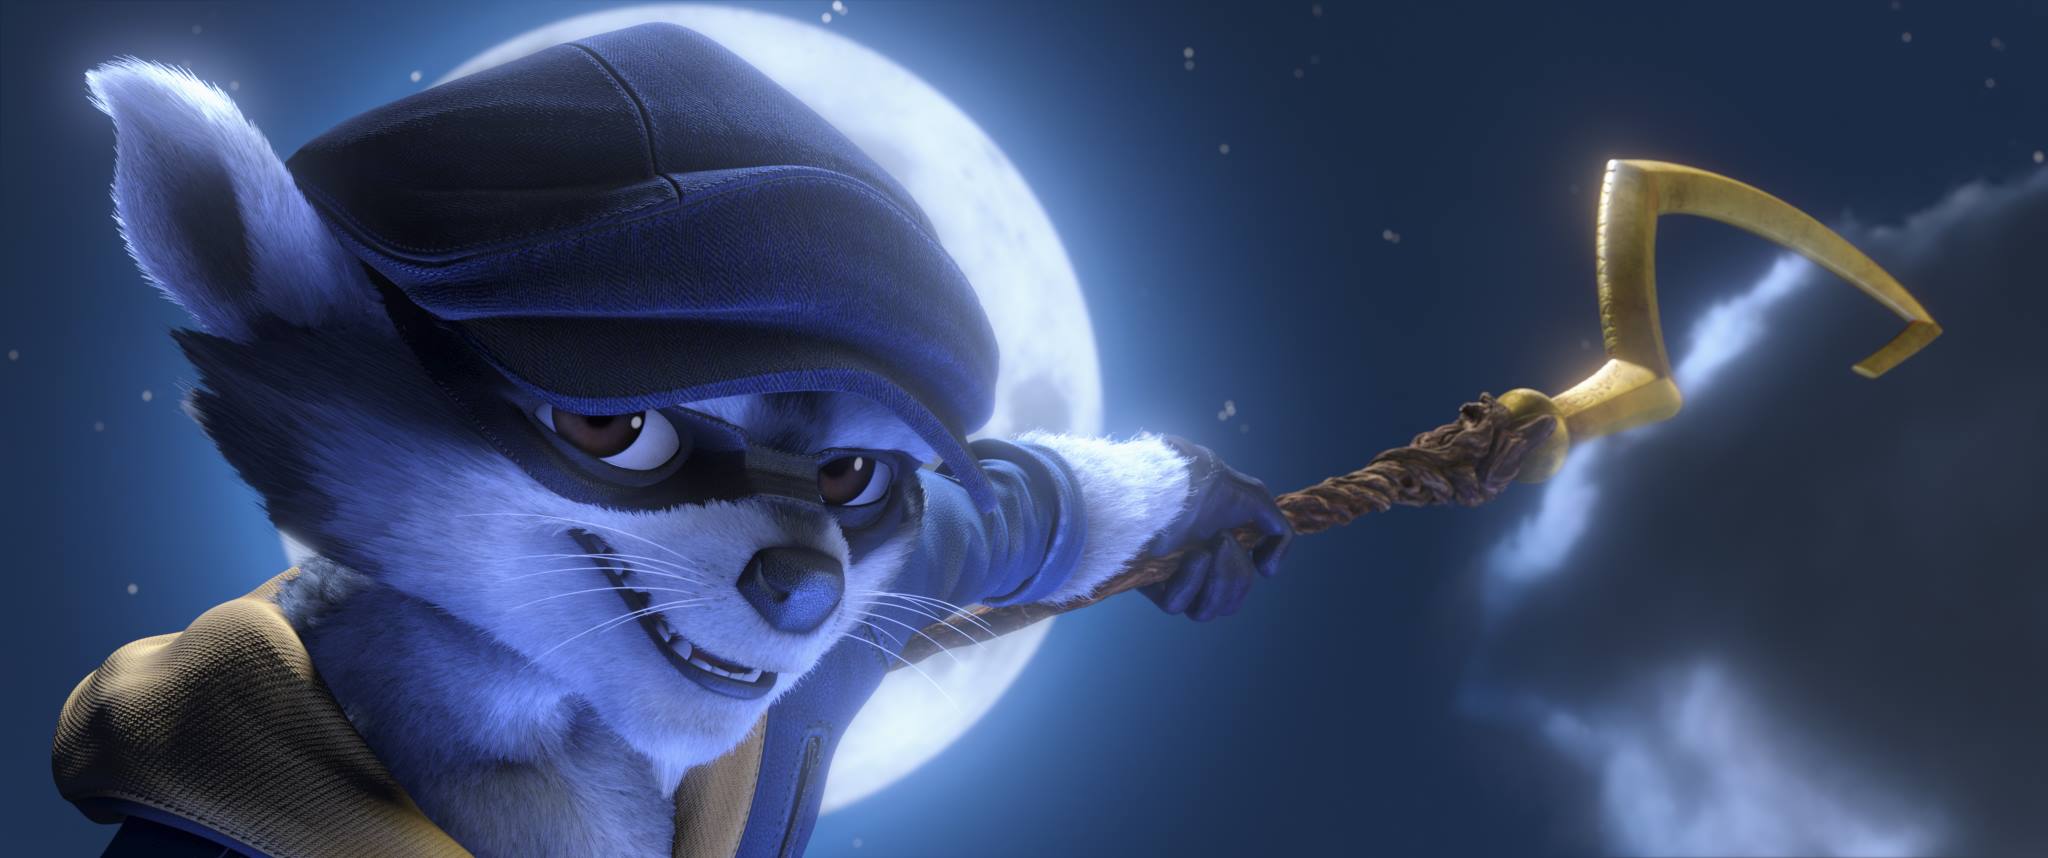 Sly Cooper movie coming in 2016, here&the first trailer